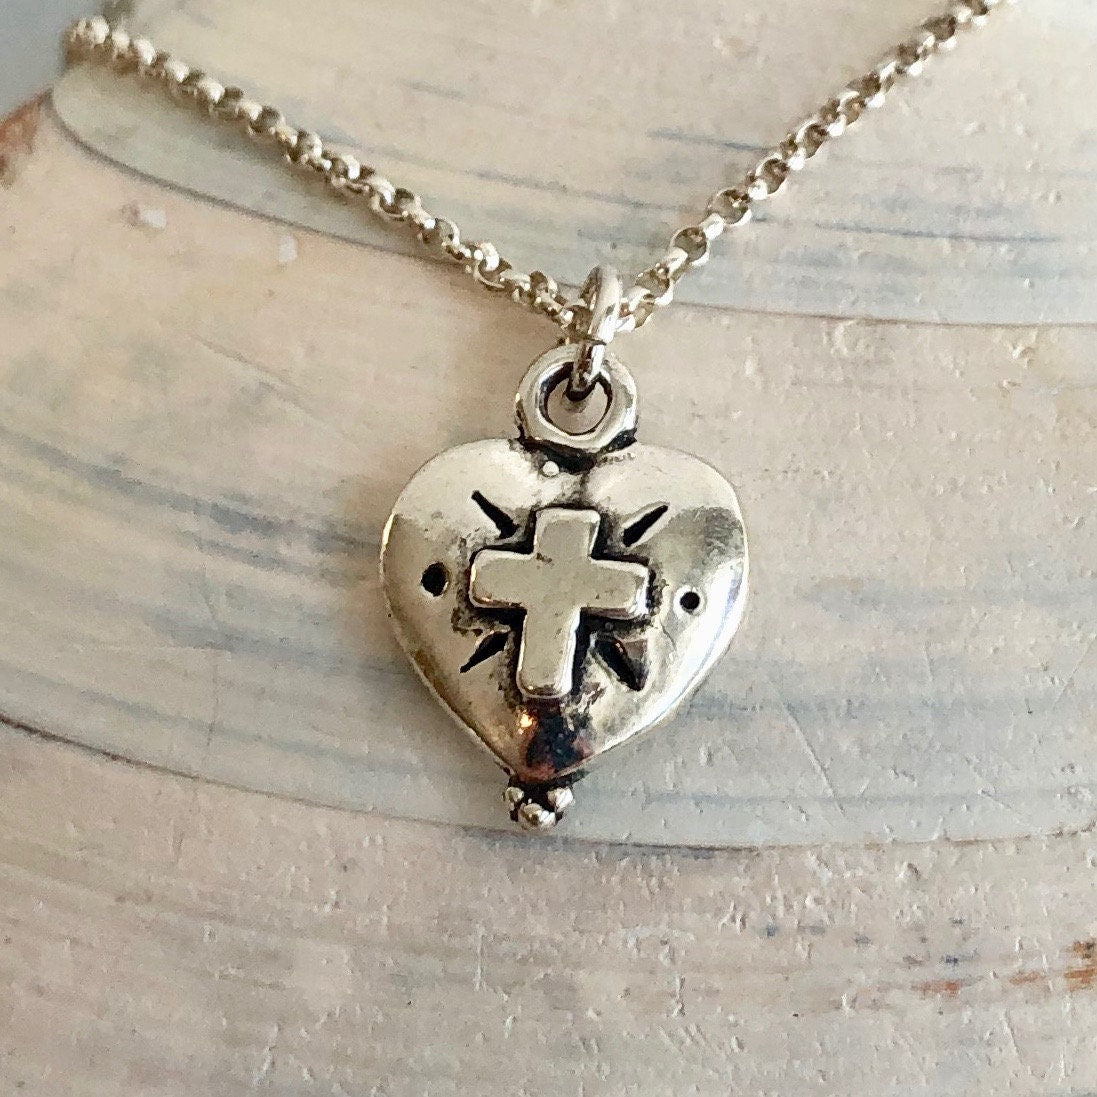 Faith based silver cross pendant. Strung on quality sterling silver chain.